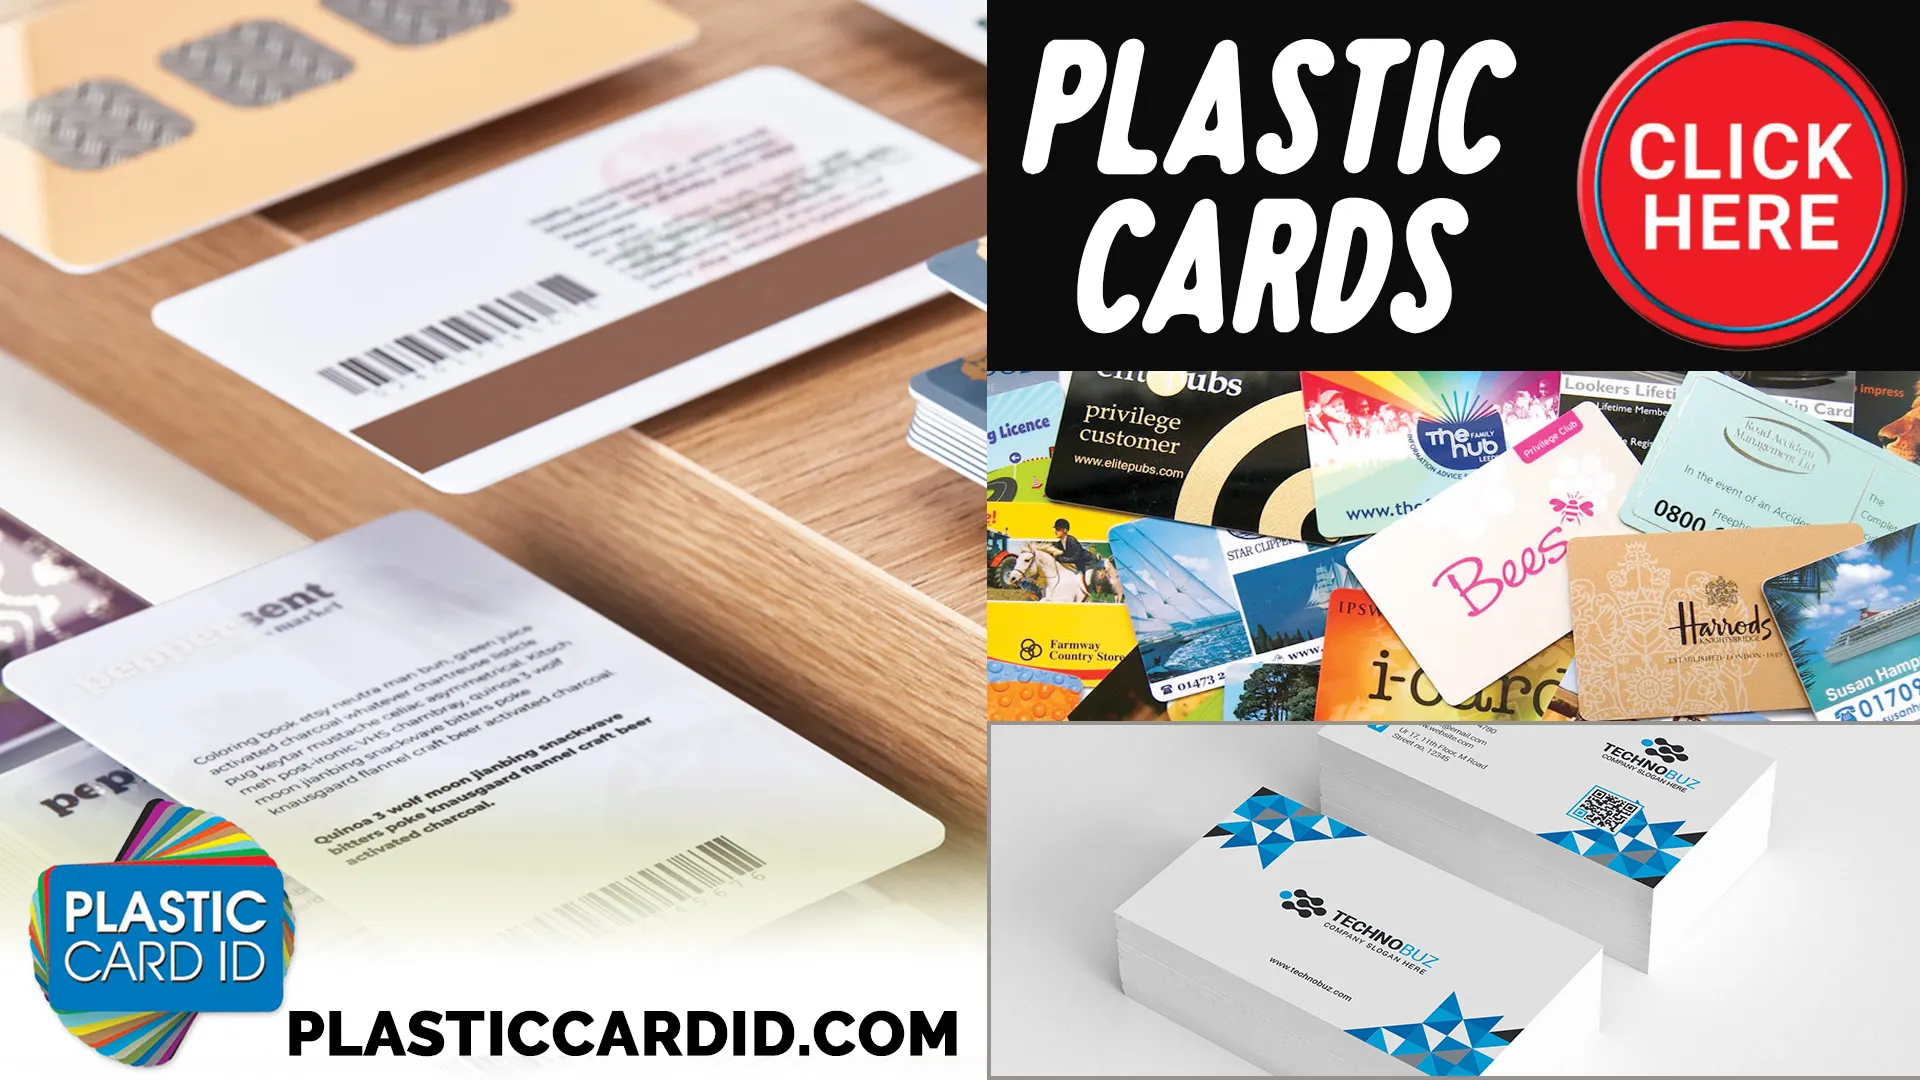 Benefits of Recycling with Plastic Card ID
